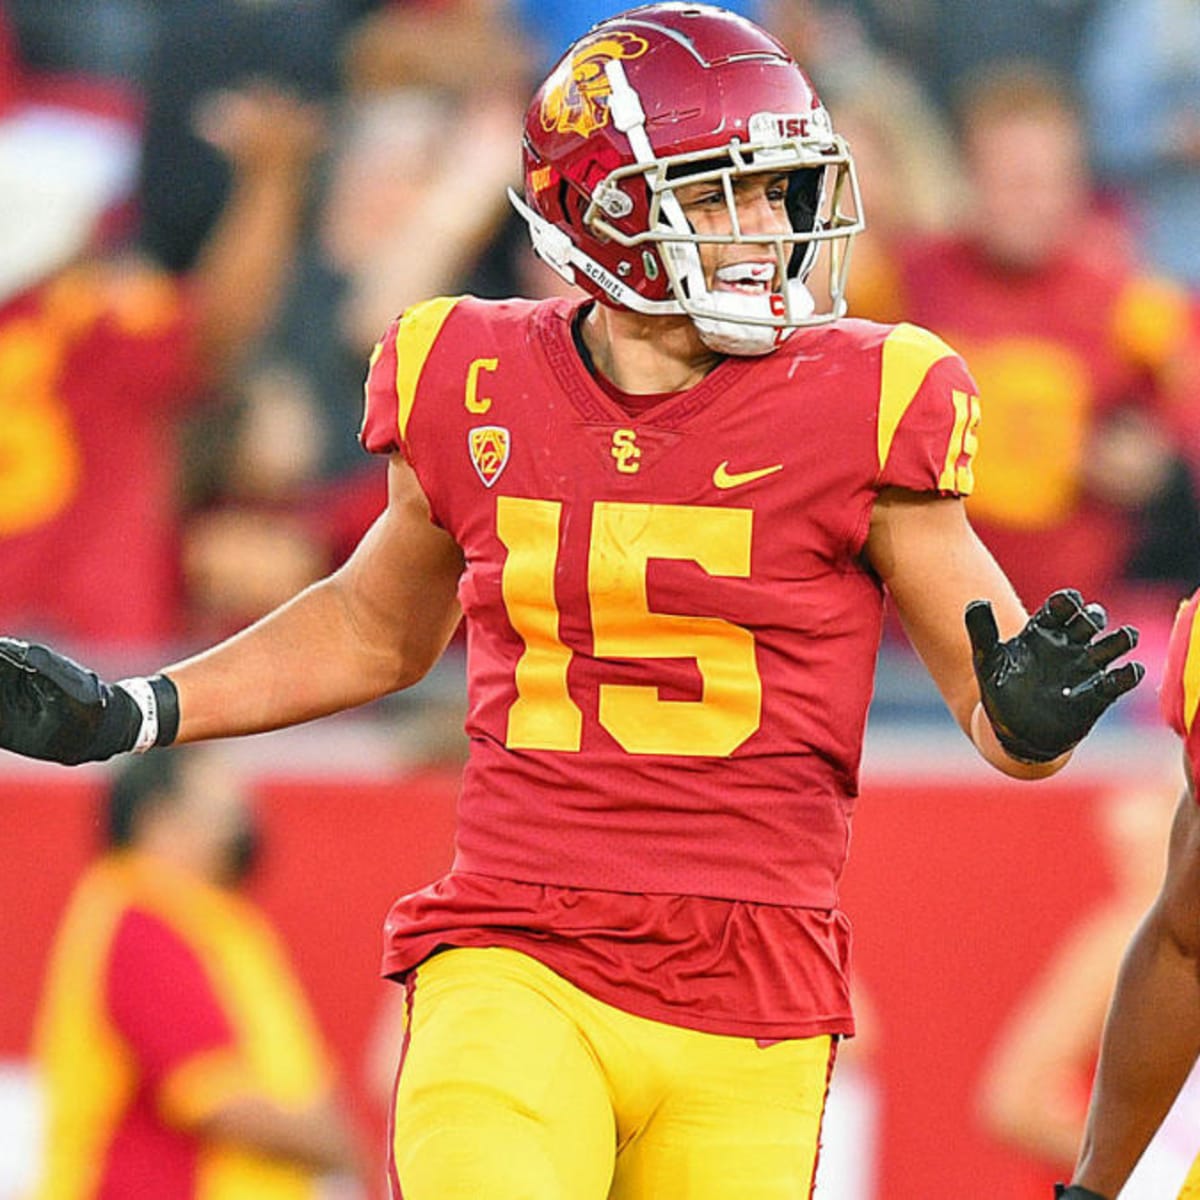 Drake London #15 participates in a game for the USC Trojans